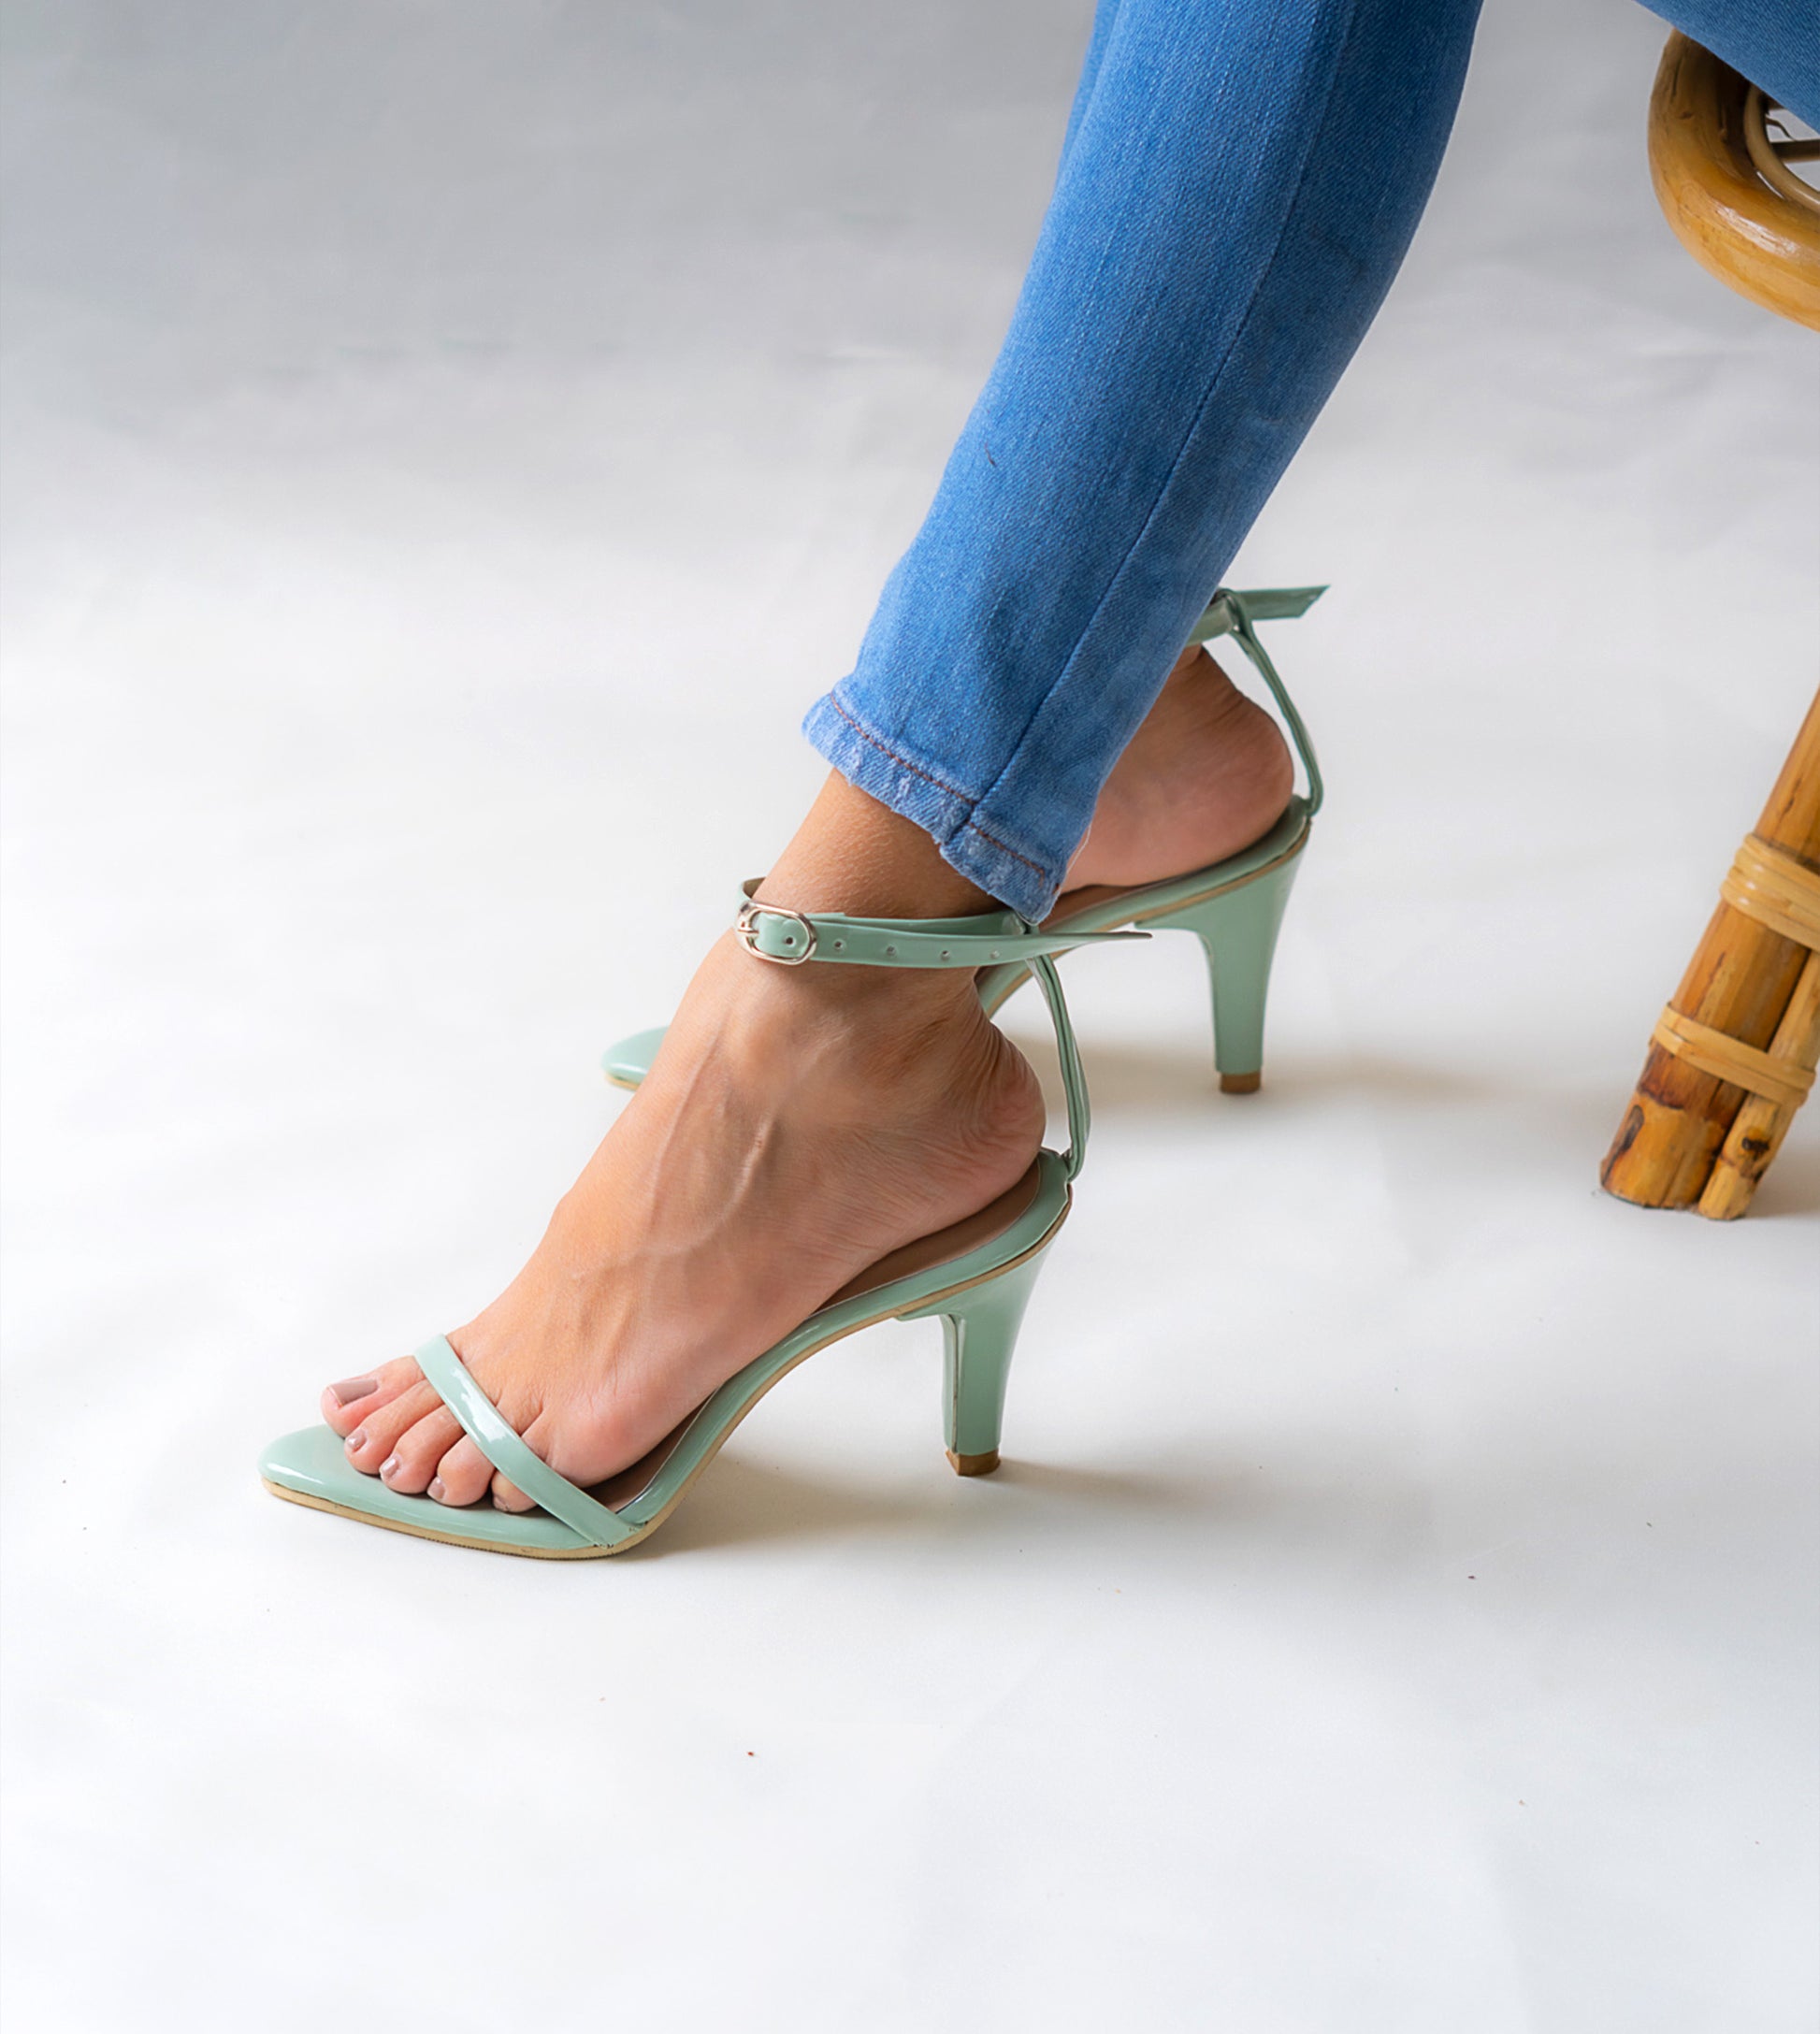 Charming mint green heel with a stylish 3-inch lift